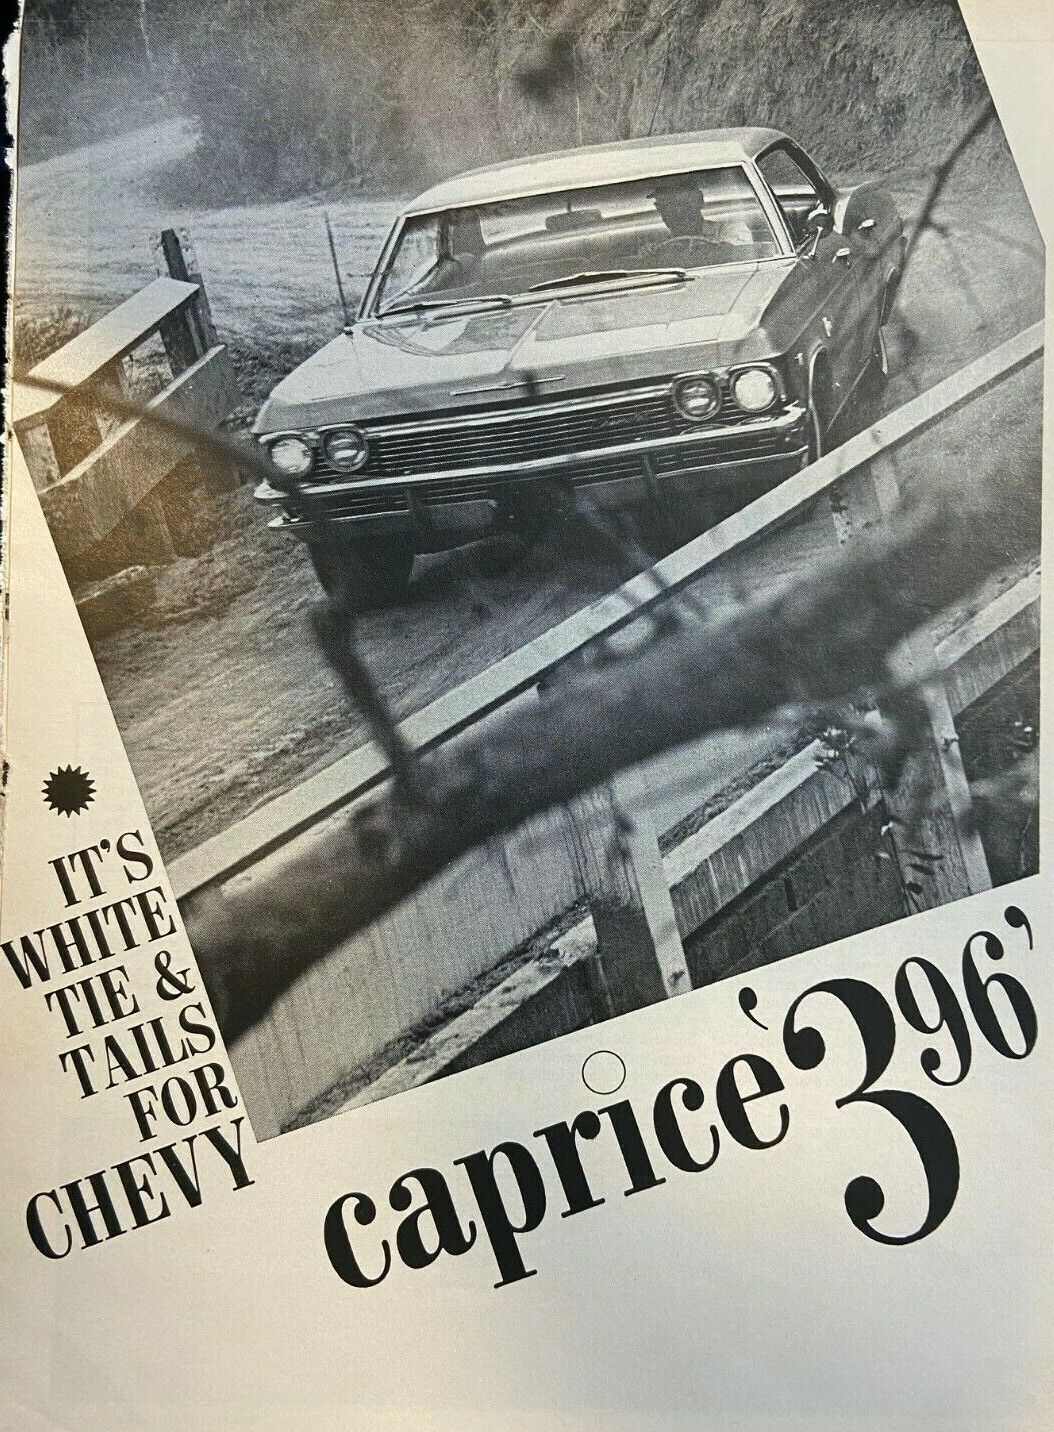 1965 Chevy Caprice 396 illustrated